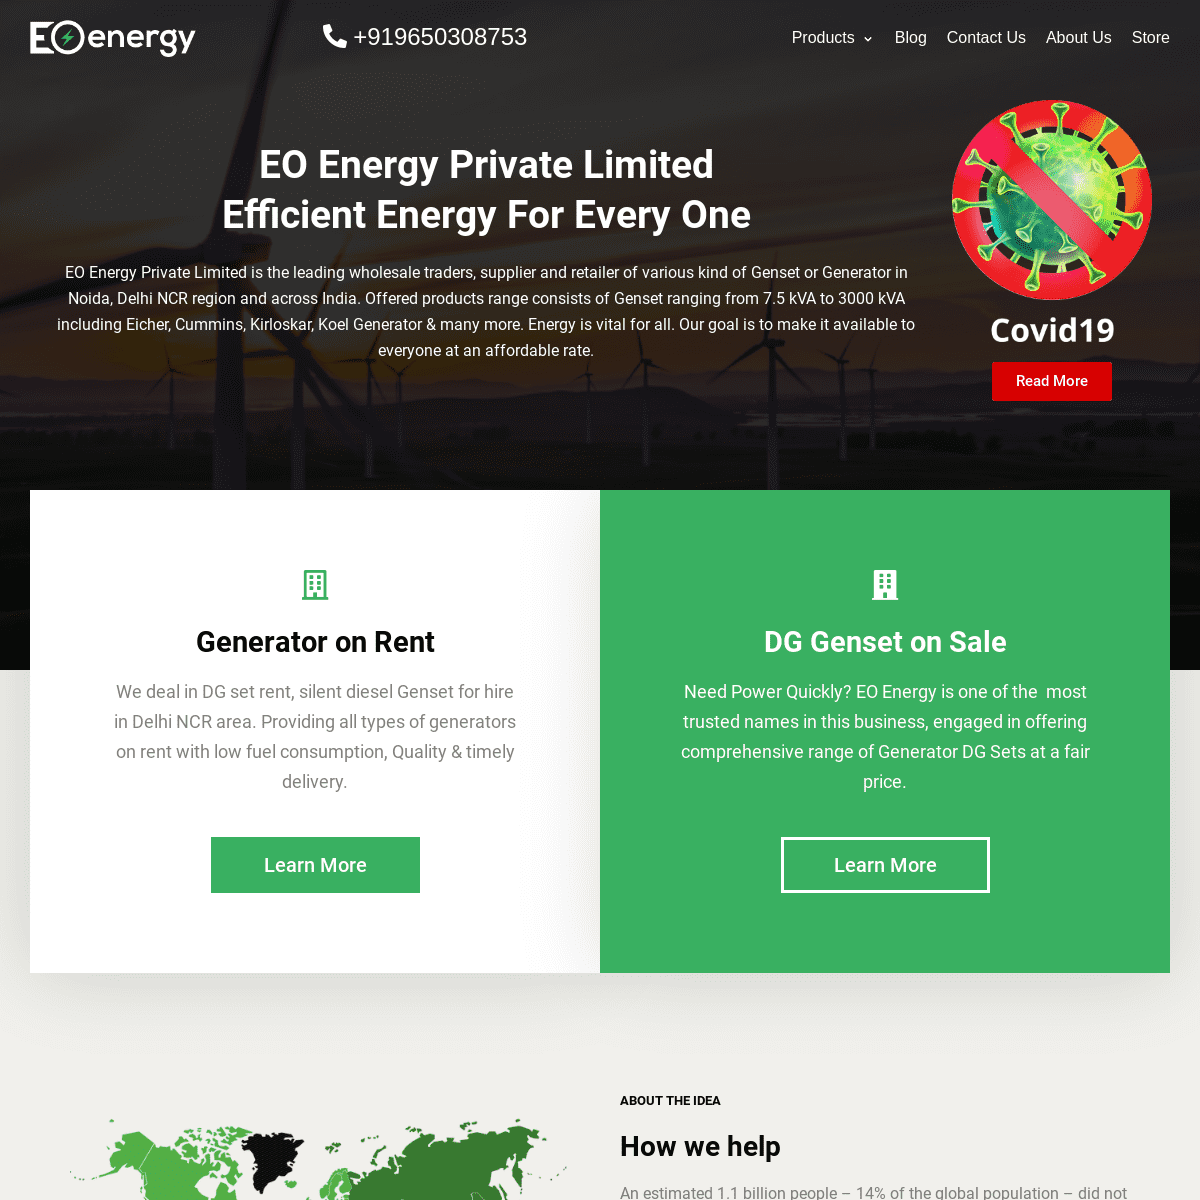 A complete backup of https://eoenergy.in